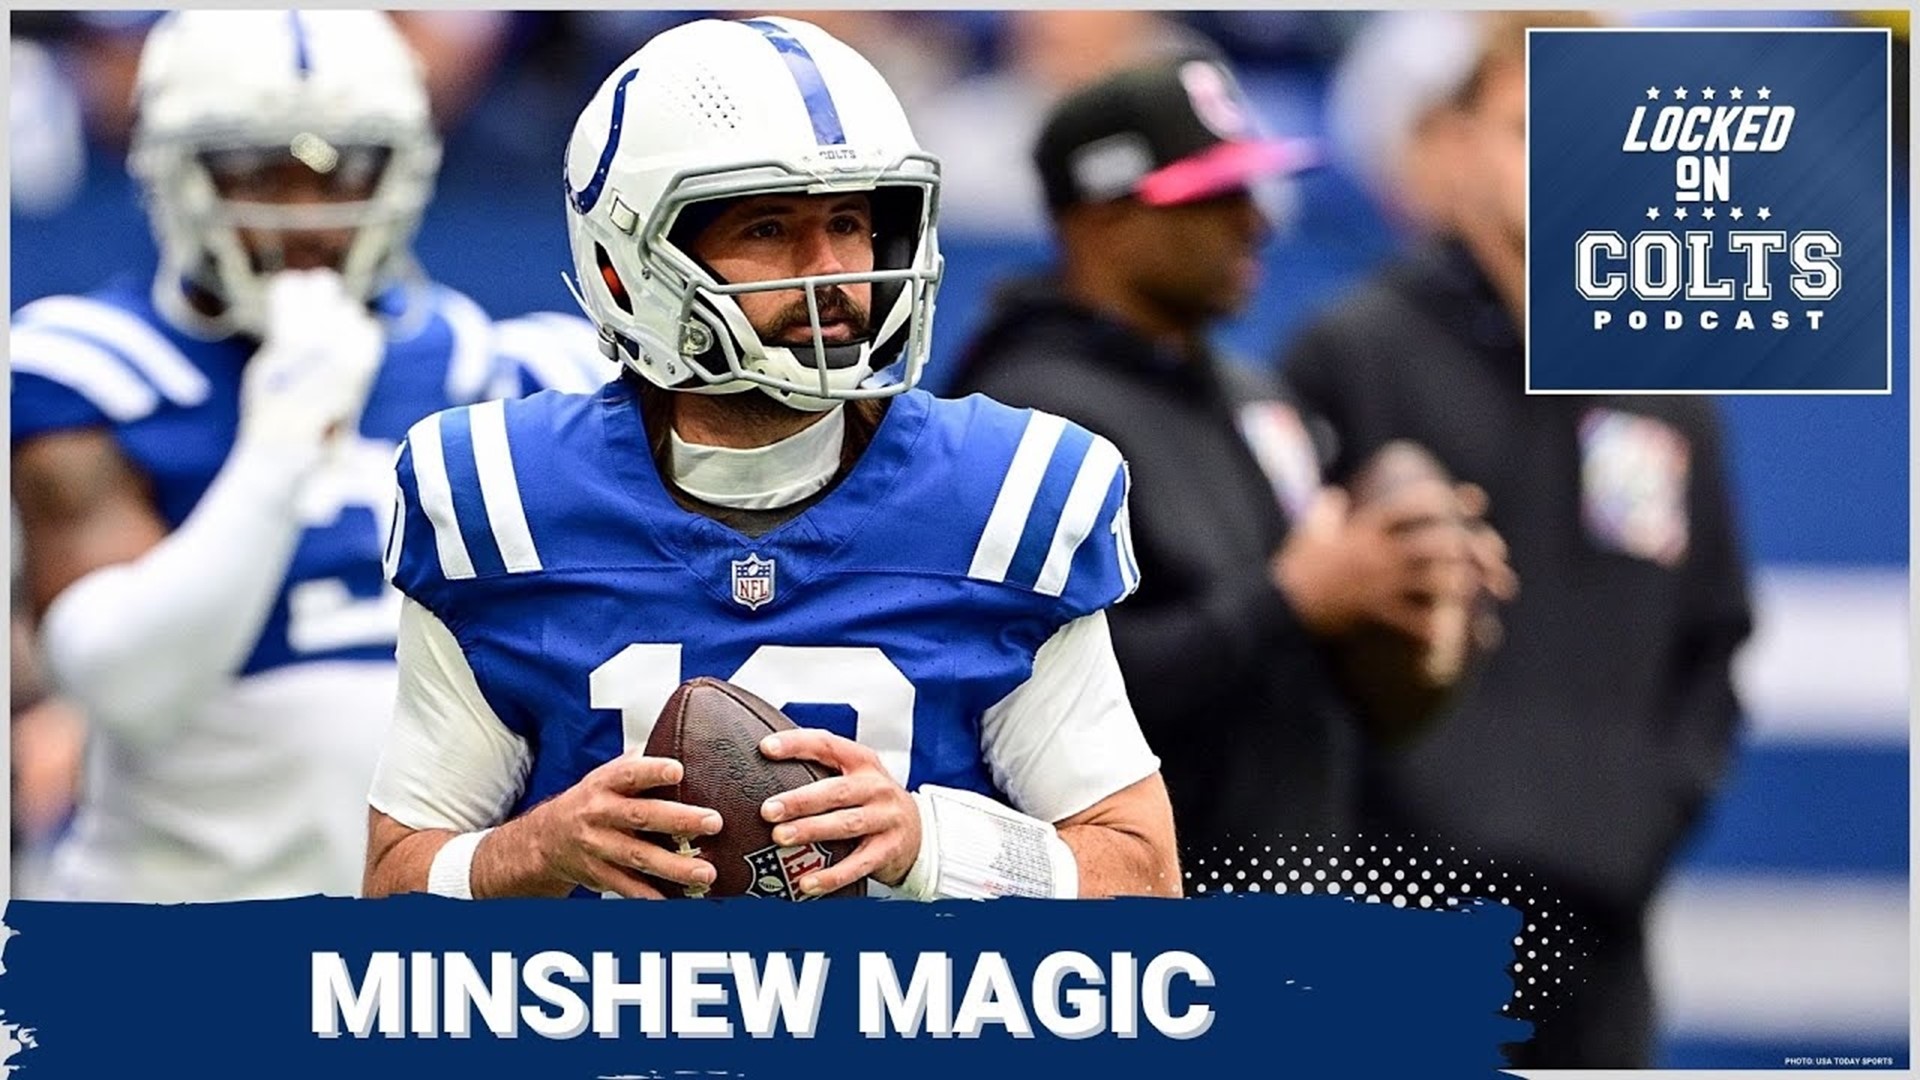 Veteran QB Gardner Minshew and star running back Jonathan Taylor lead the Indianapolis Colts into a fierce divisional battle with the Jacksonville Jaguars.